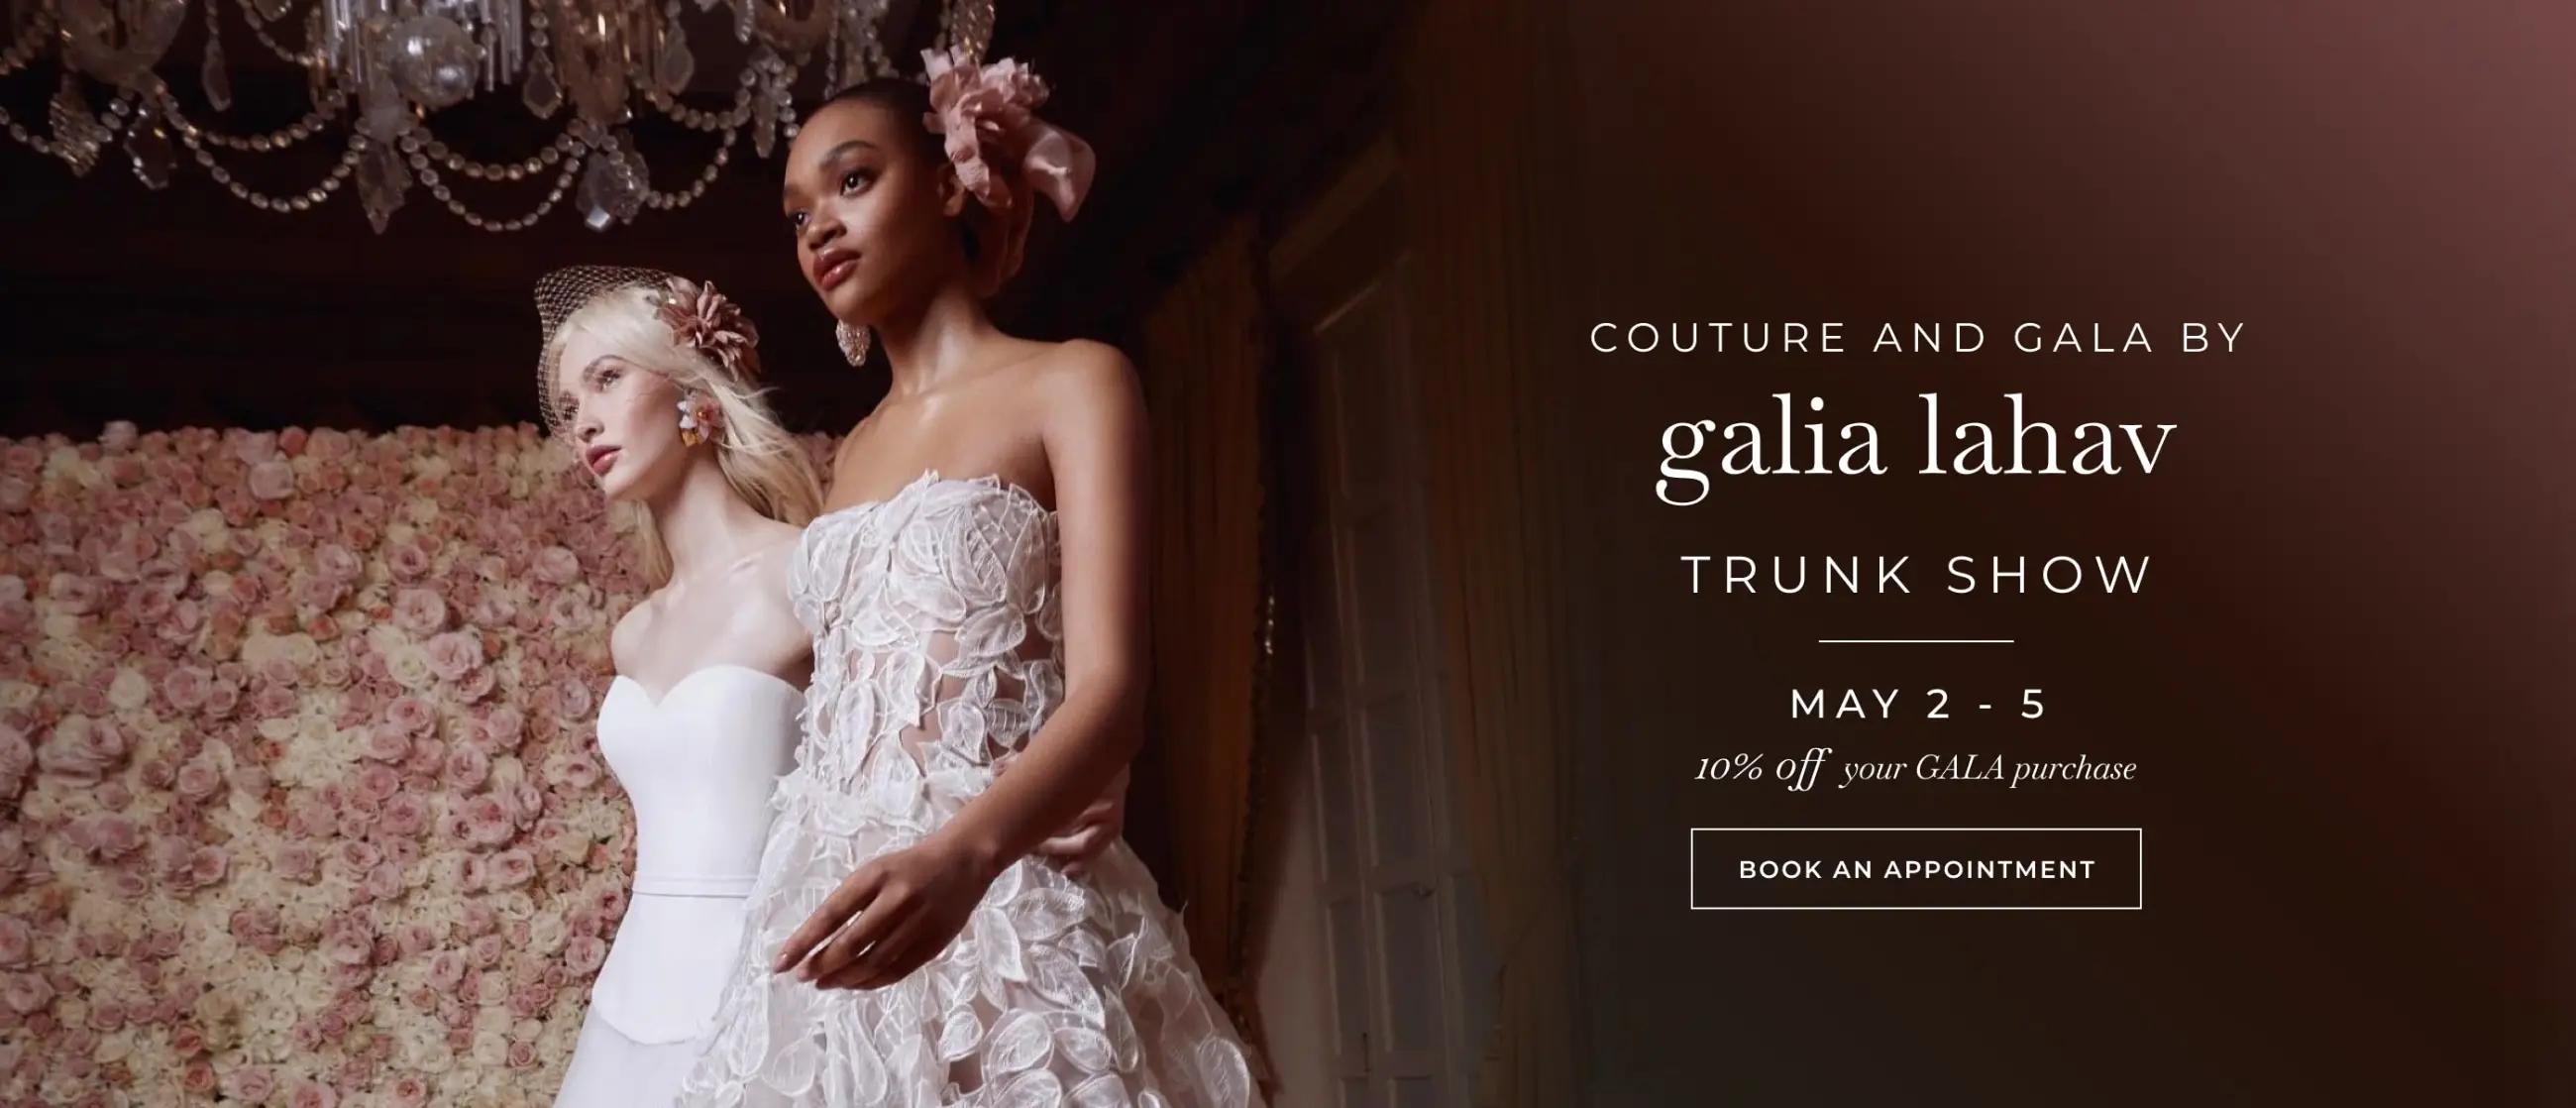 Couture and Gala by Galia Lahav Trunk Show banner desktop